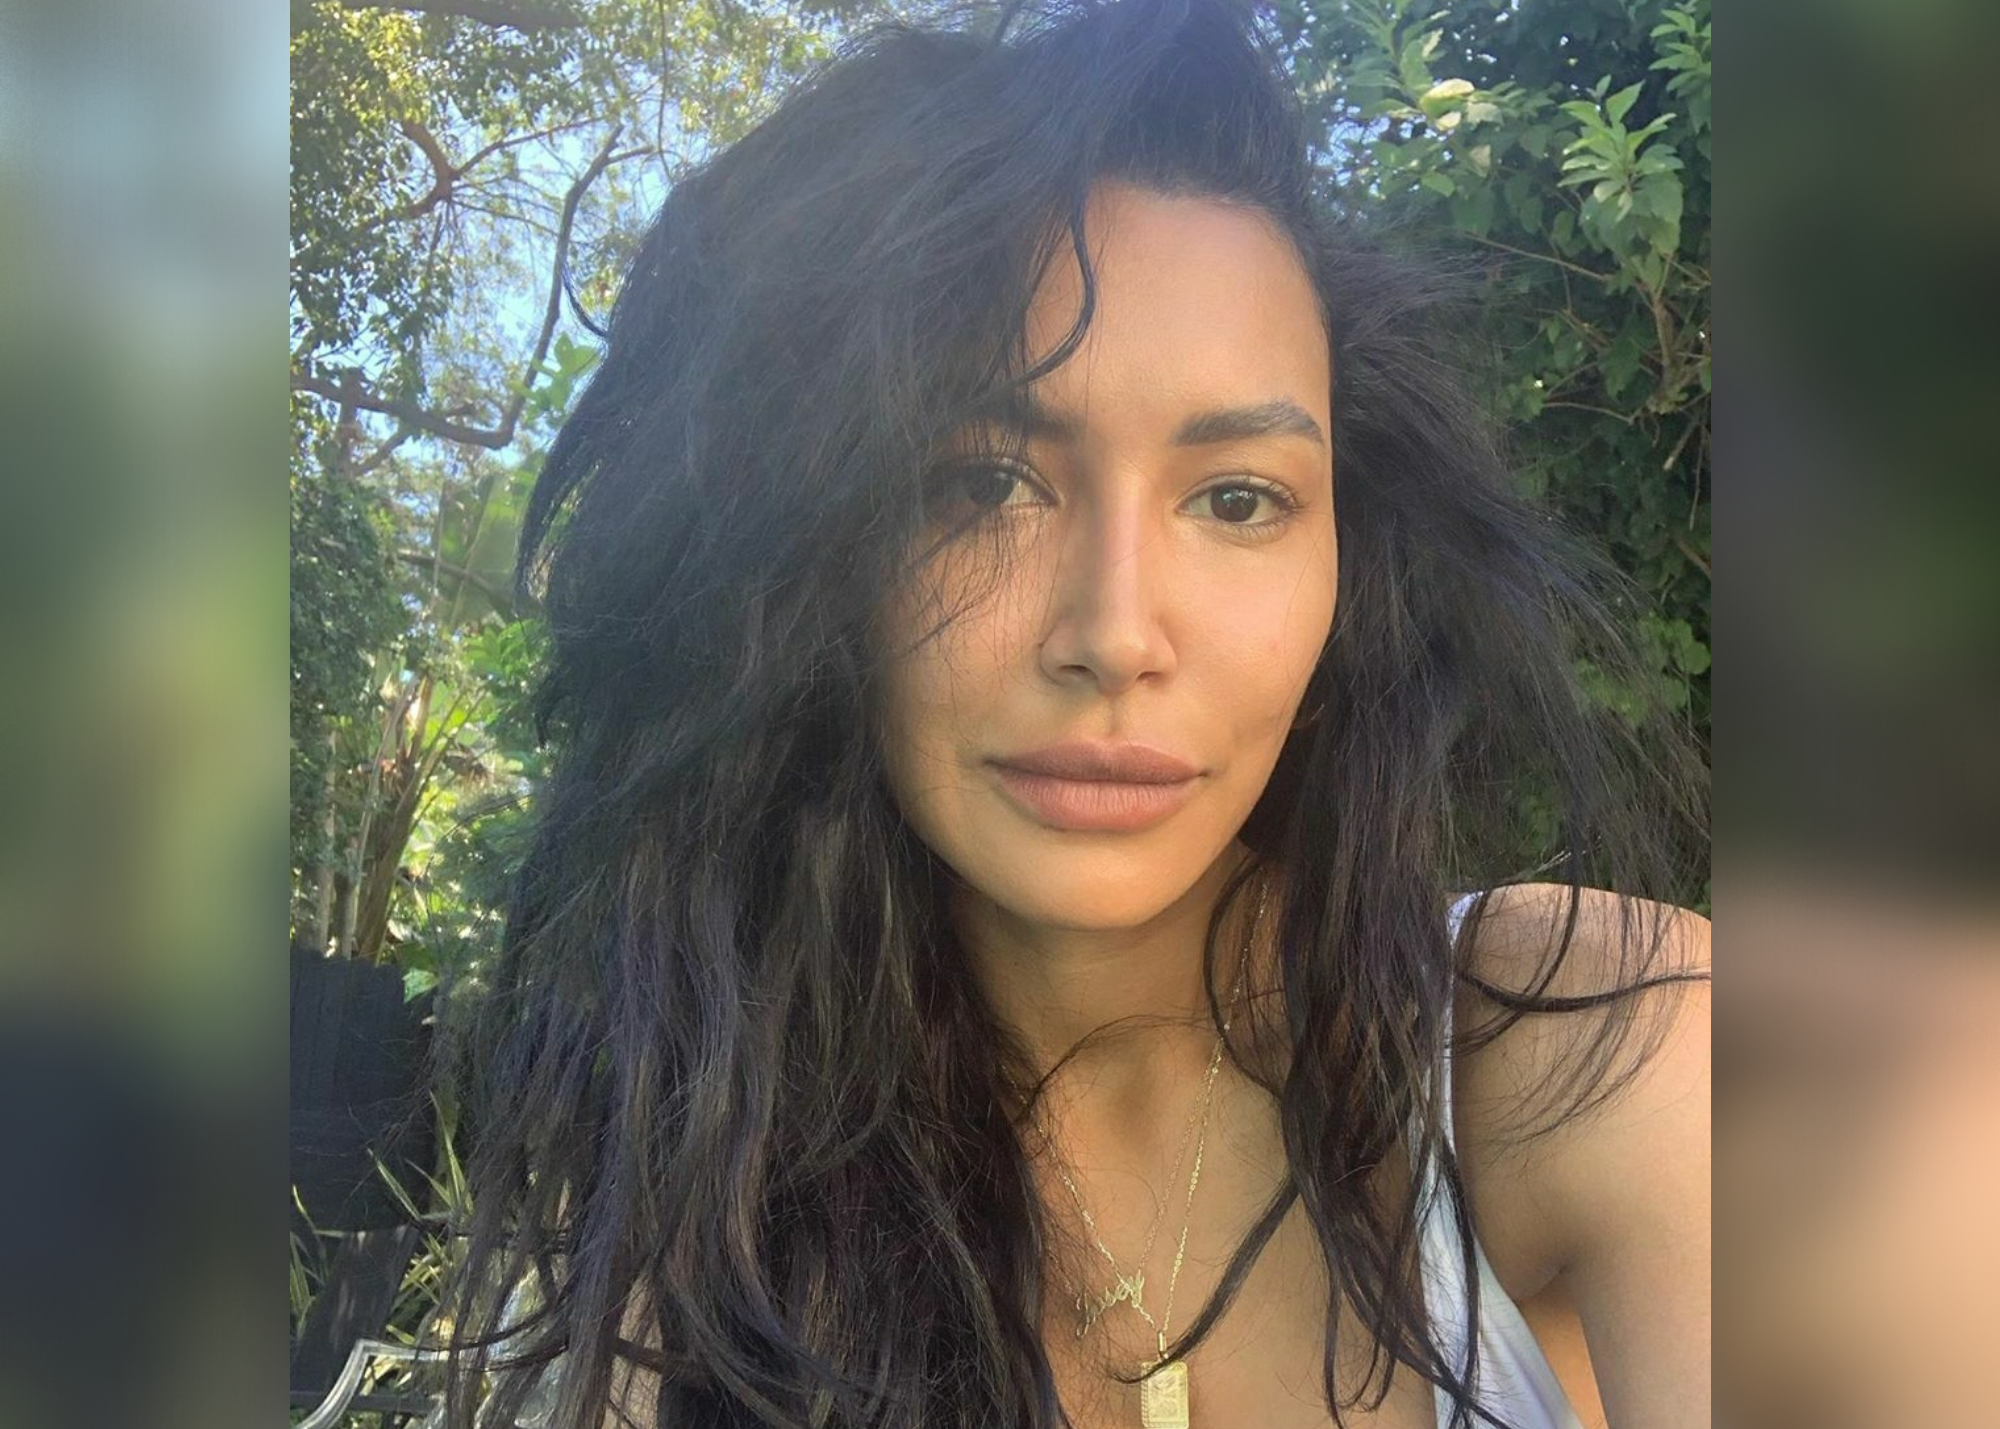 UPDATE: The Body Of Naya Rivera Has Been Found, Sheriff Confirms